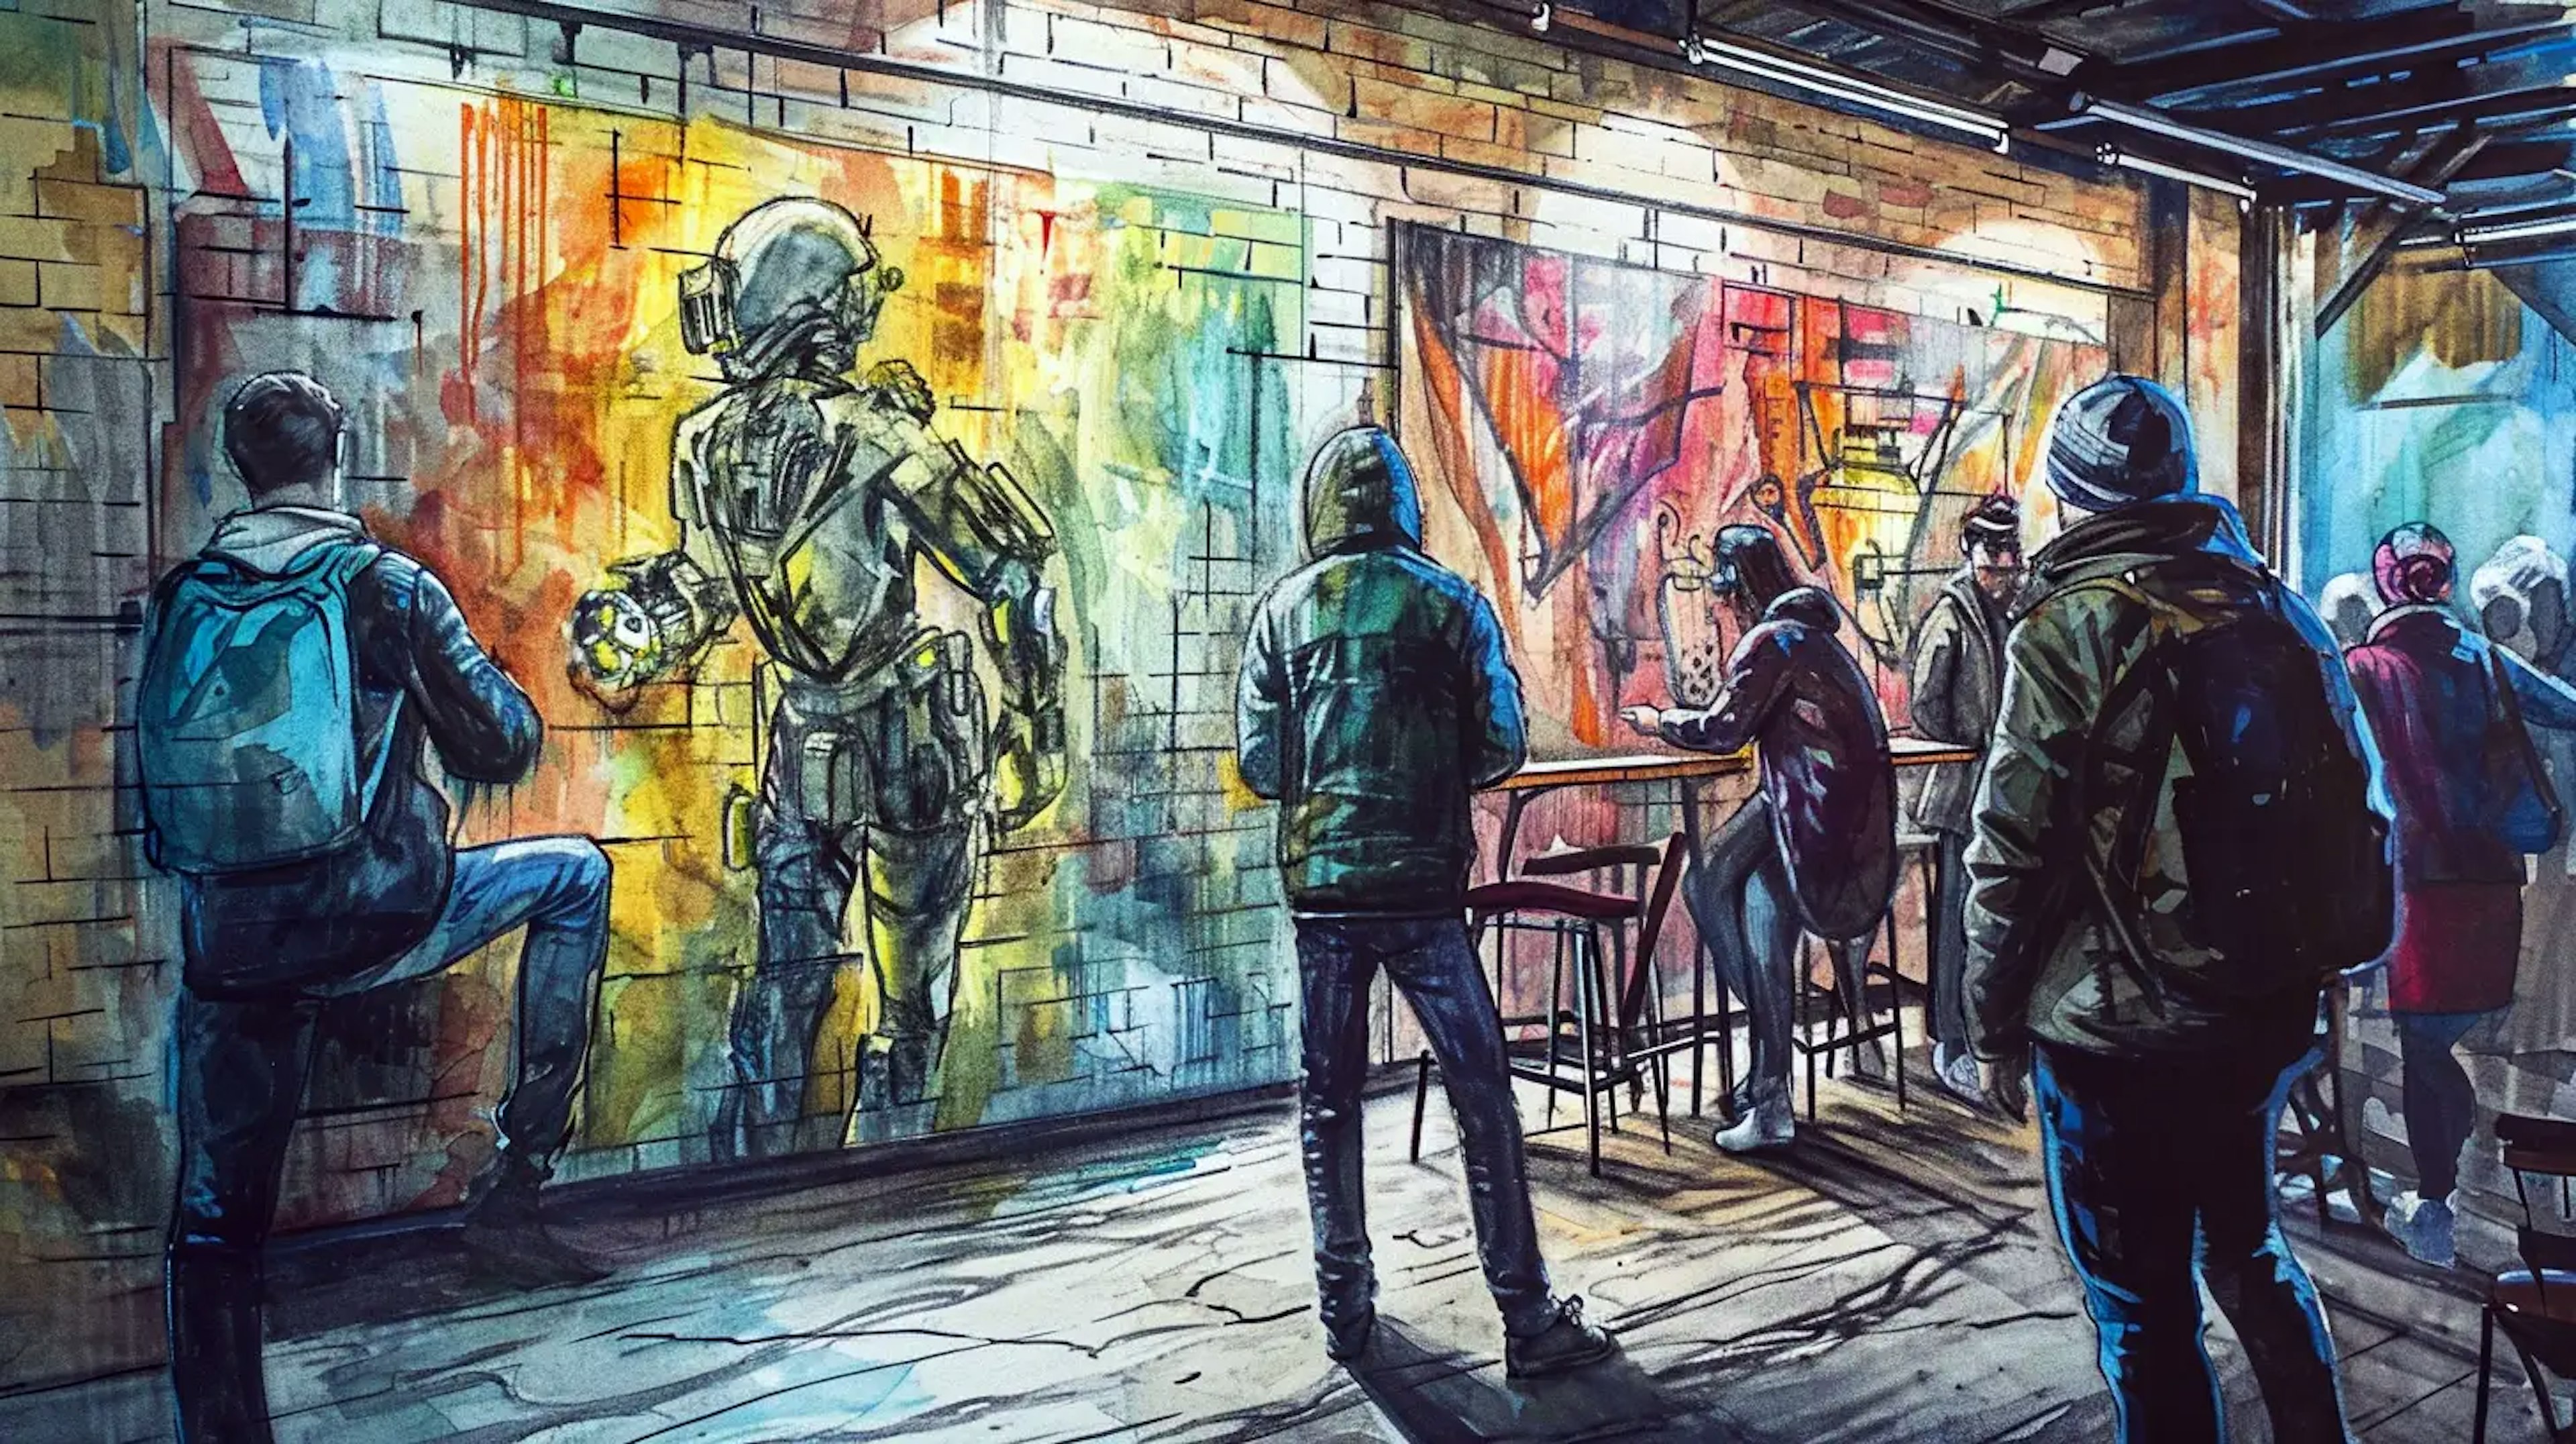 An illustration of pedestrians looking at a mural.